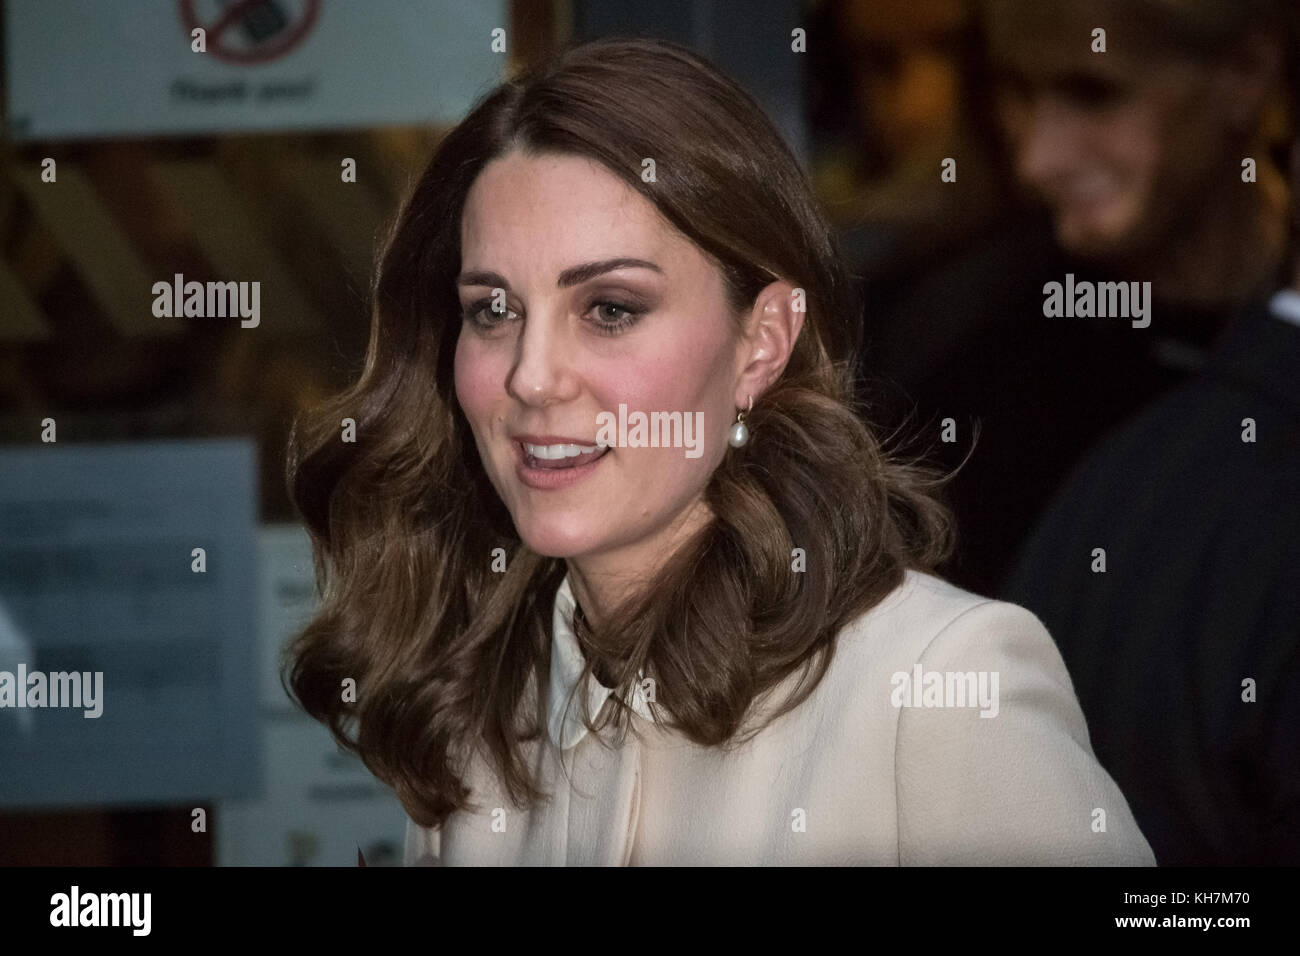 London, UK. 14th Nov, 2017. The Duchess of Cambridge leaves Hornsey Road Children's Centre in north London after viewing the family and parental support services which are delivered to the Centre, including those offered by the charity Family Action, of which The Queen is Patron. Credit: Guy Corbishley/Alamy Live News Stock Photo